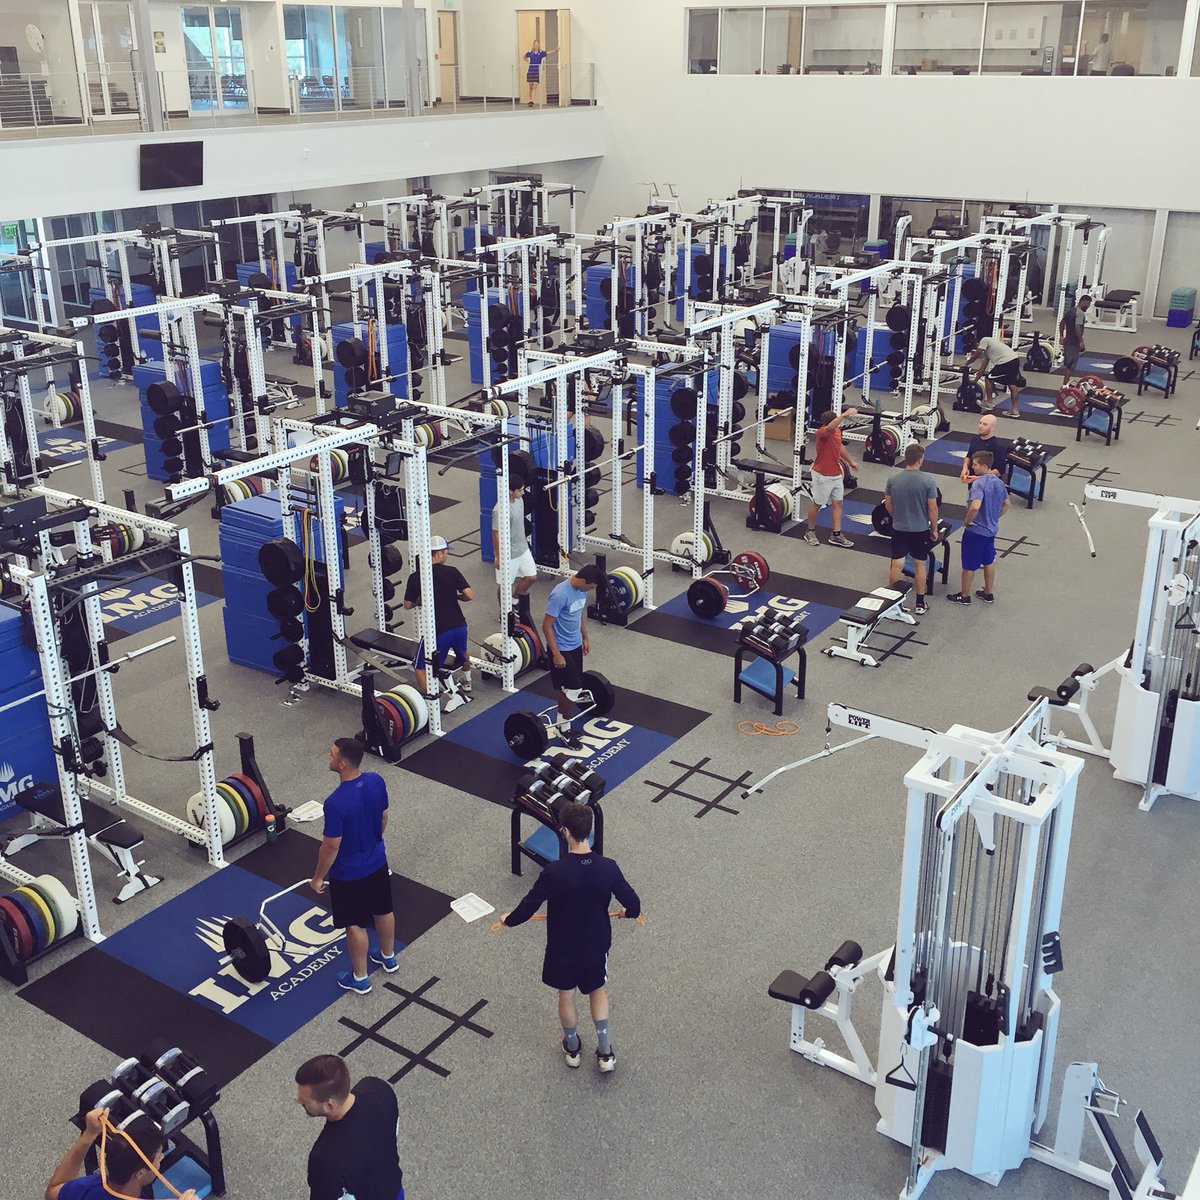 Nate Ebner On Twitter Gym Session This Morning In Img S